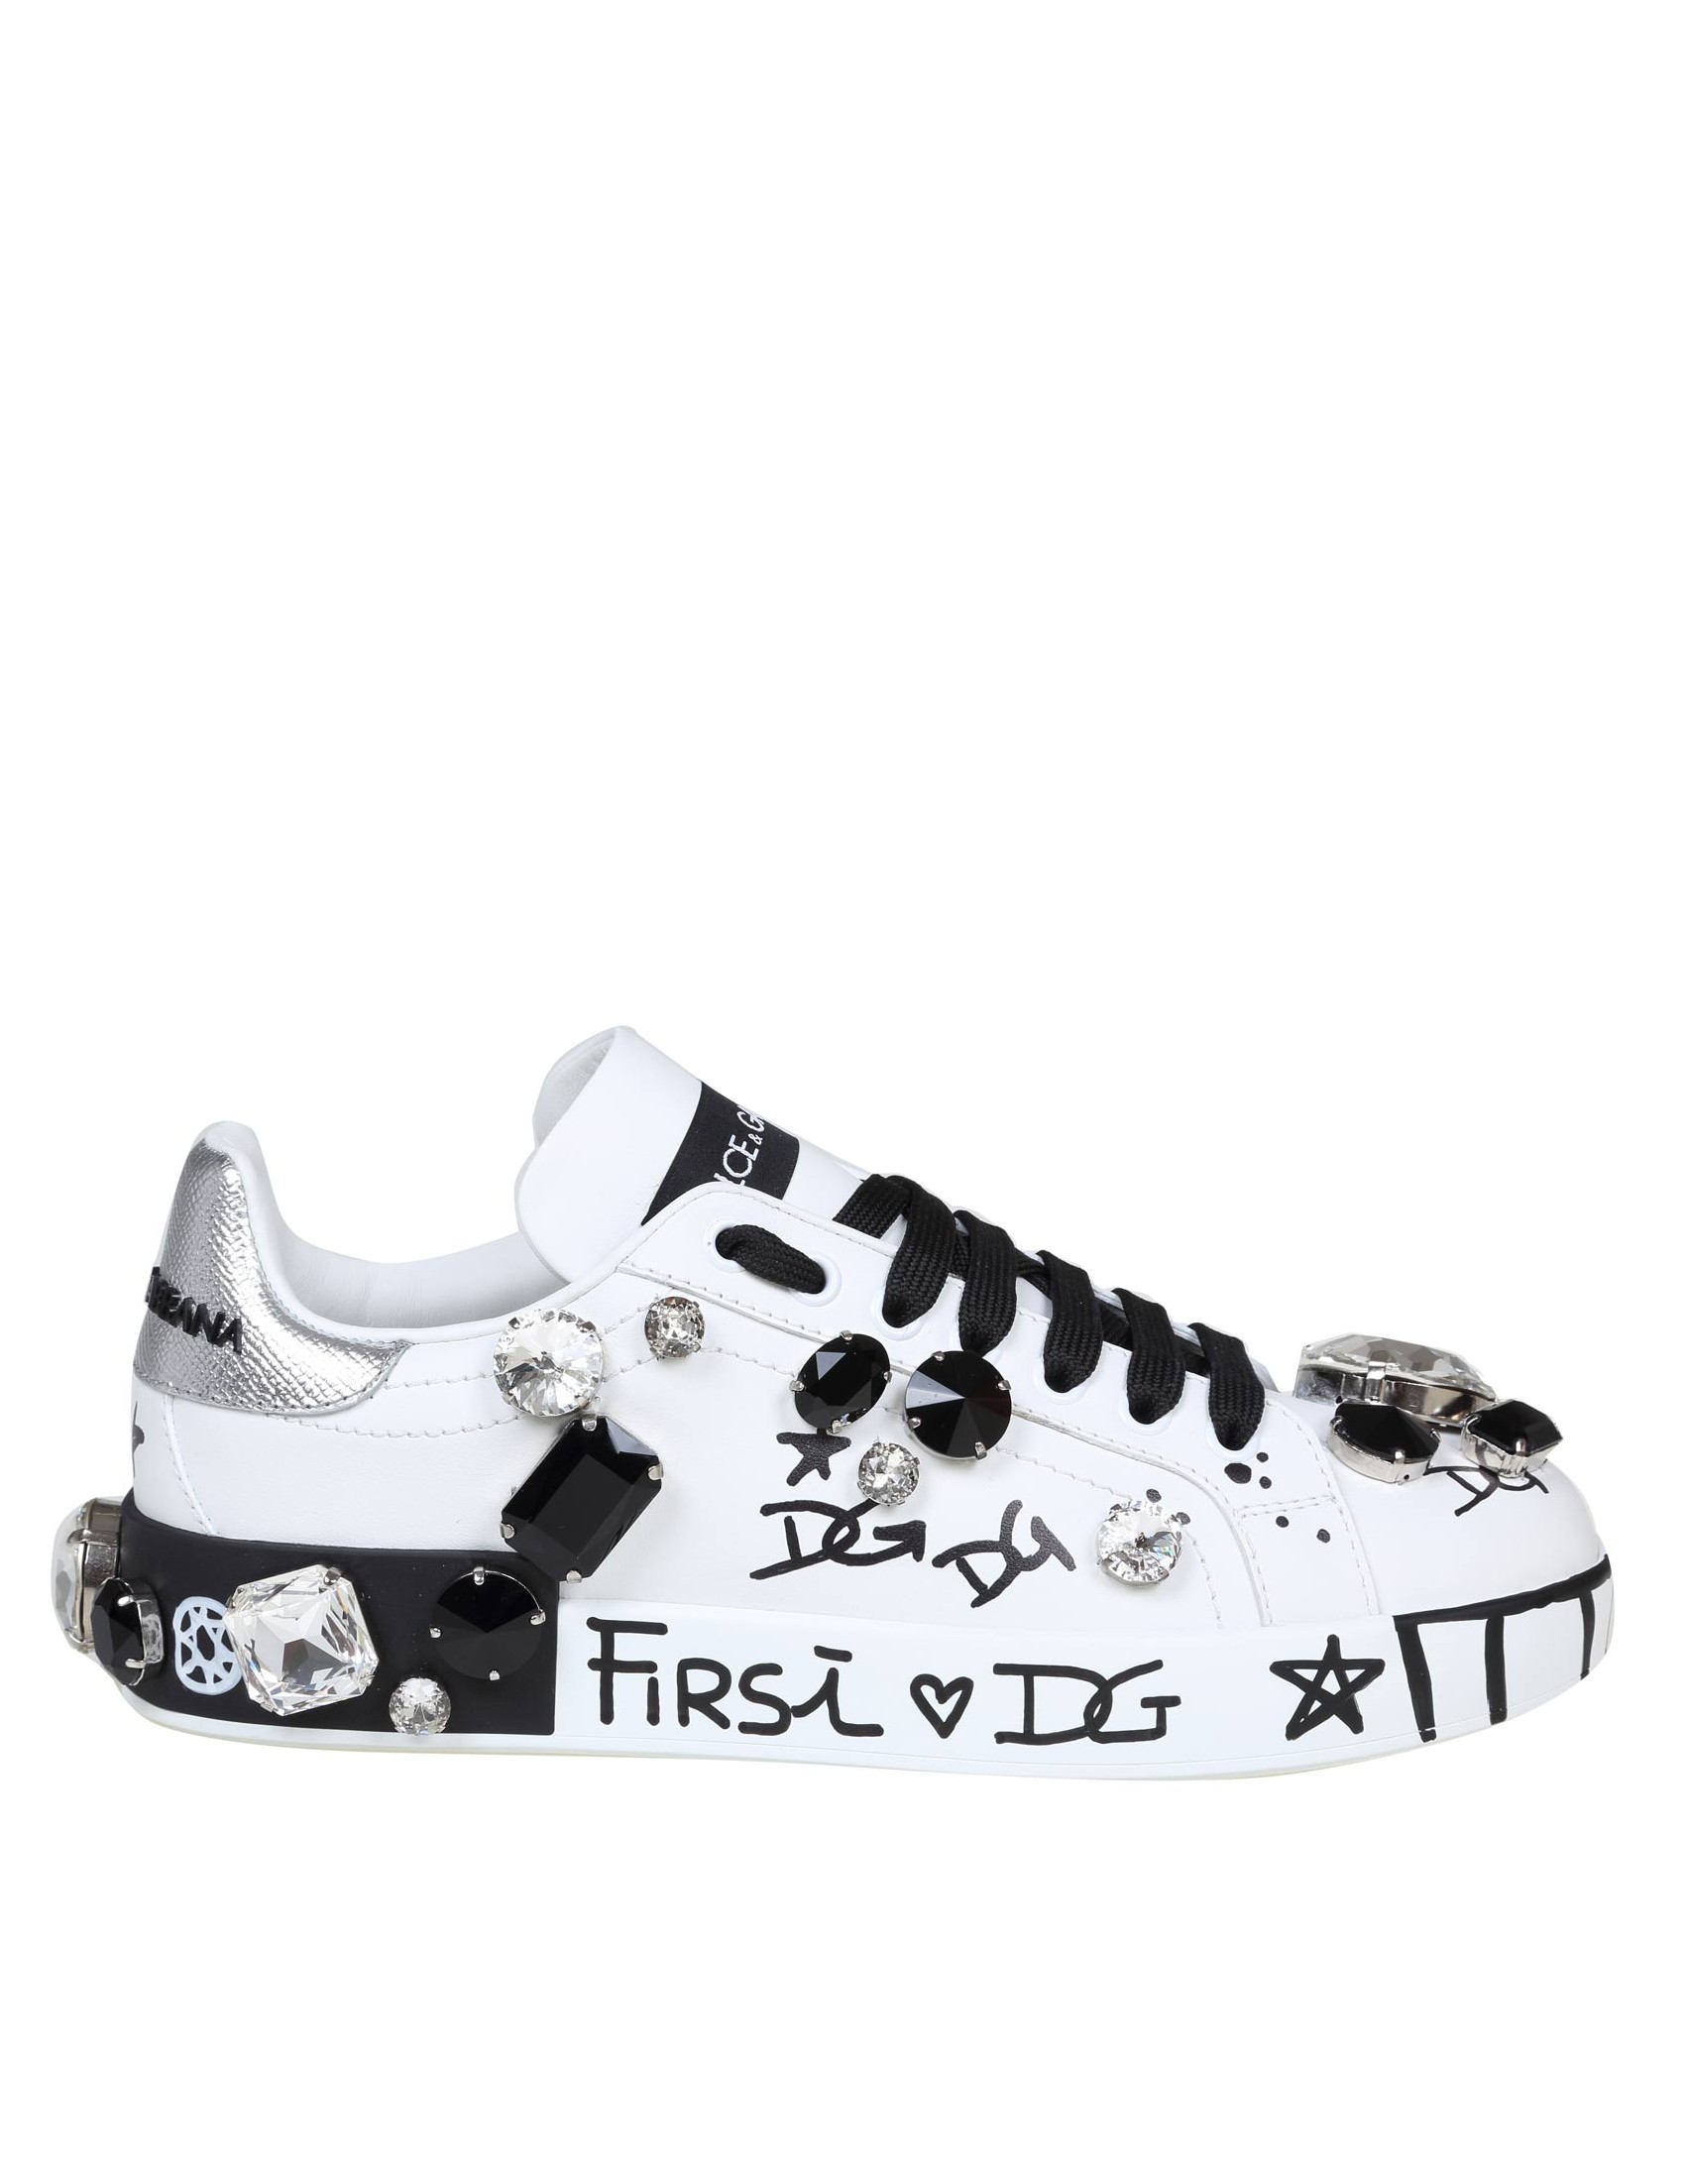 DOLCE & GABBANA SNEAKERS IN LEATHER WITH APPLIED STONES